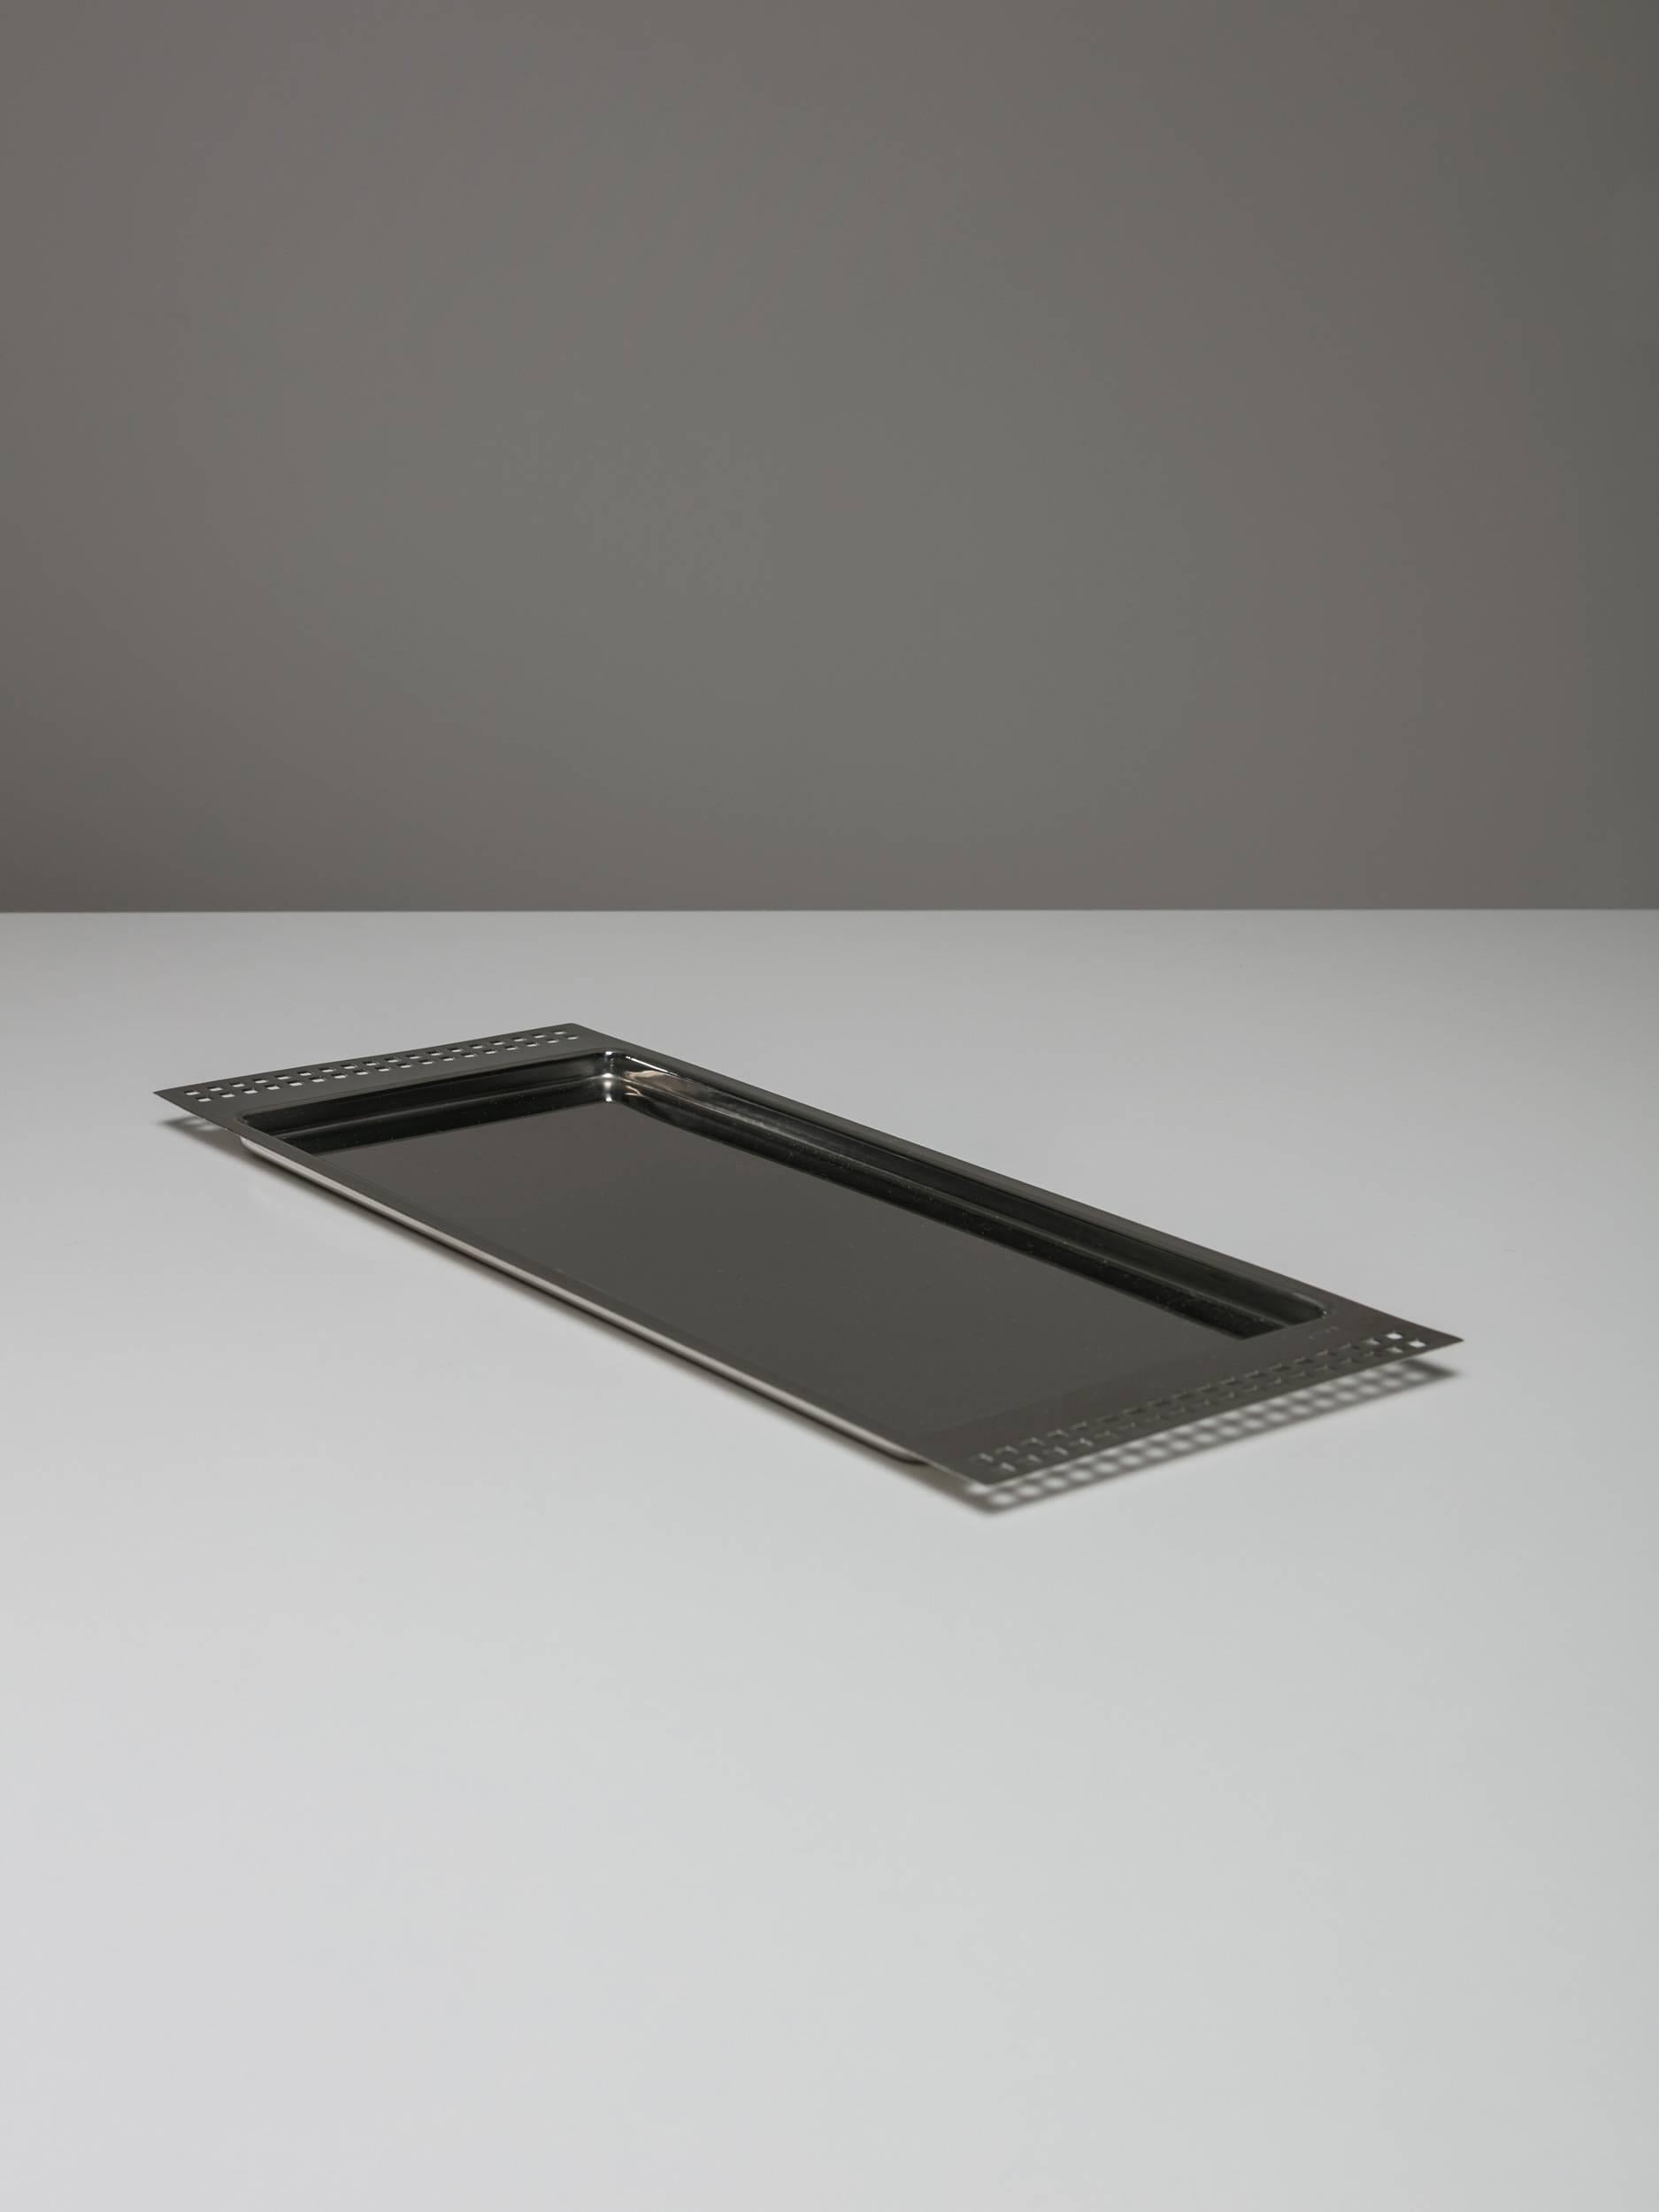 Steel tray by Vittorio Gregotti for Cleto Munari.
Vienna secession decoration for this remarkable piece.